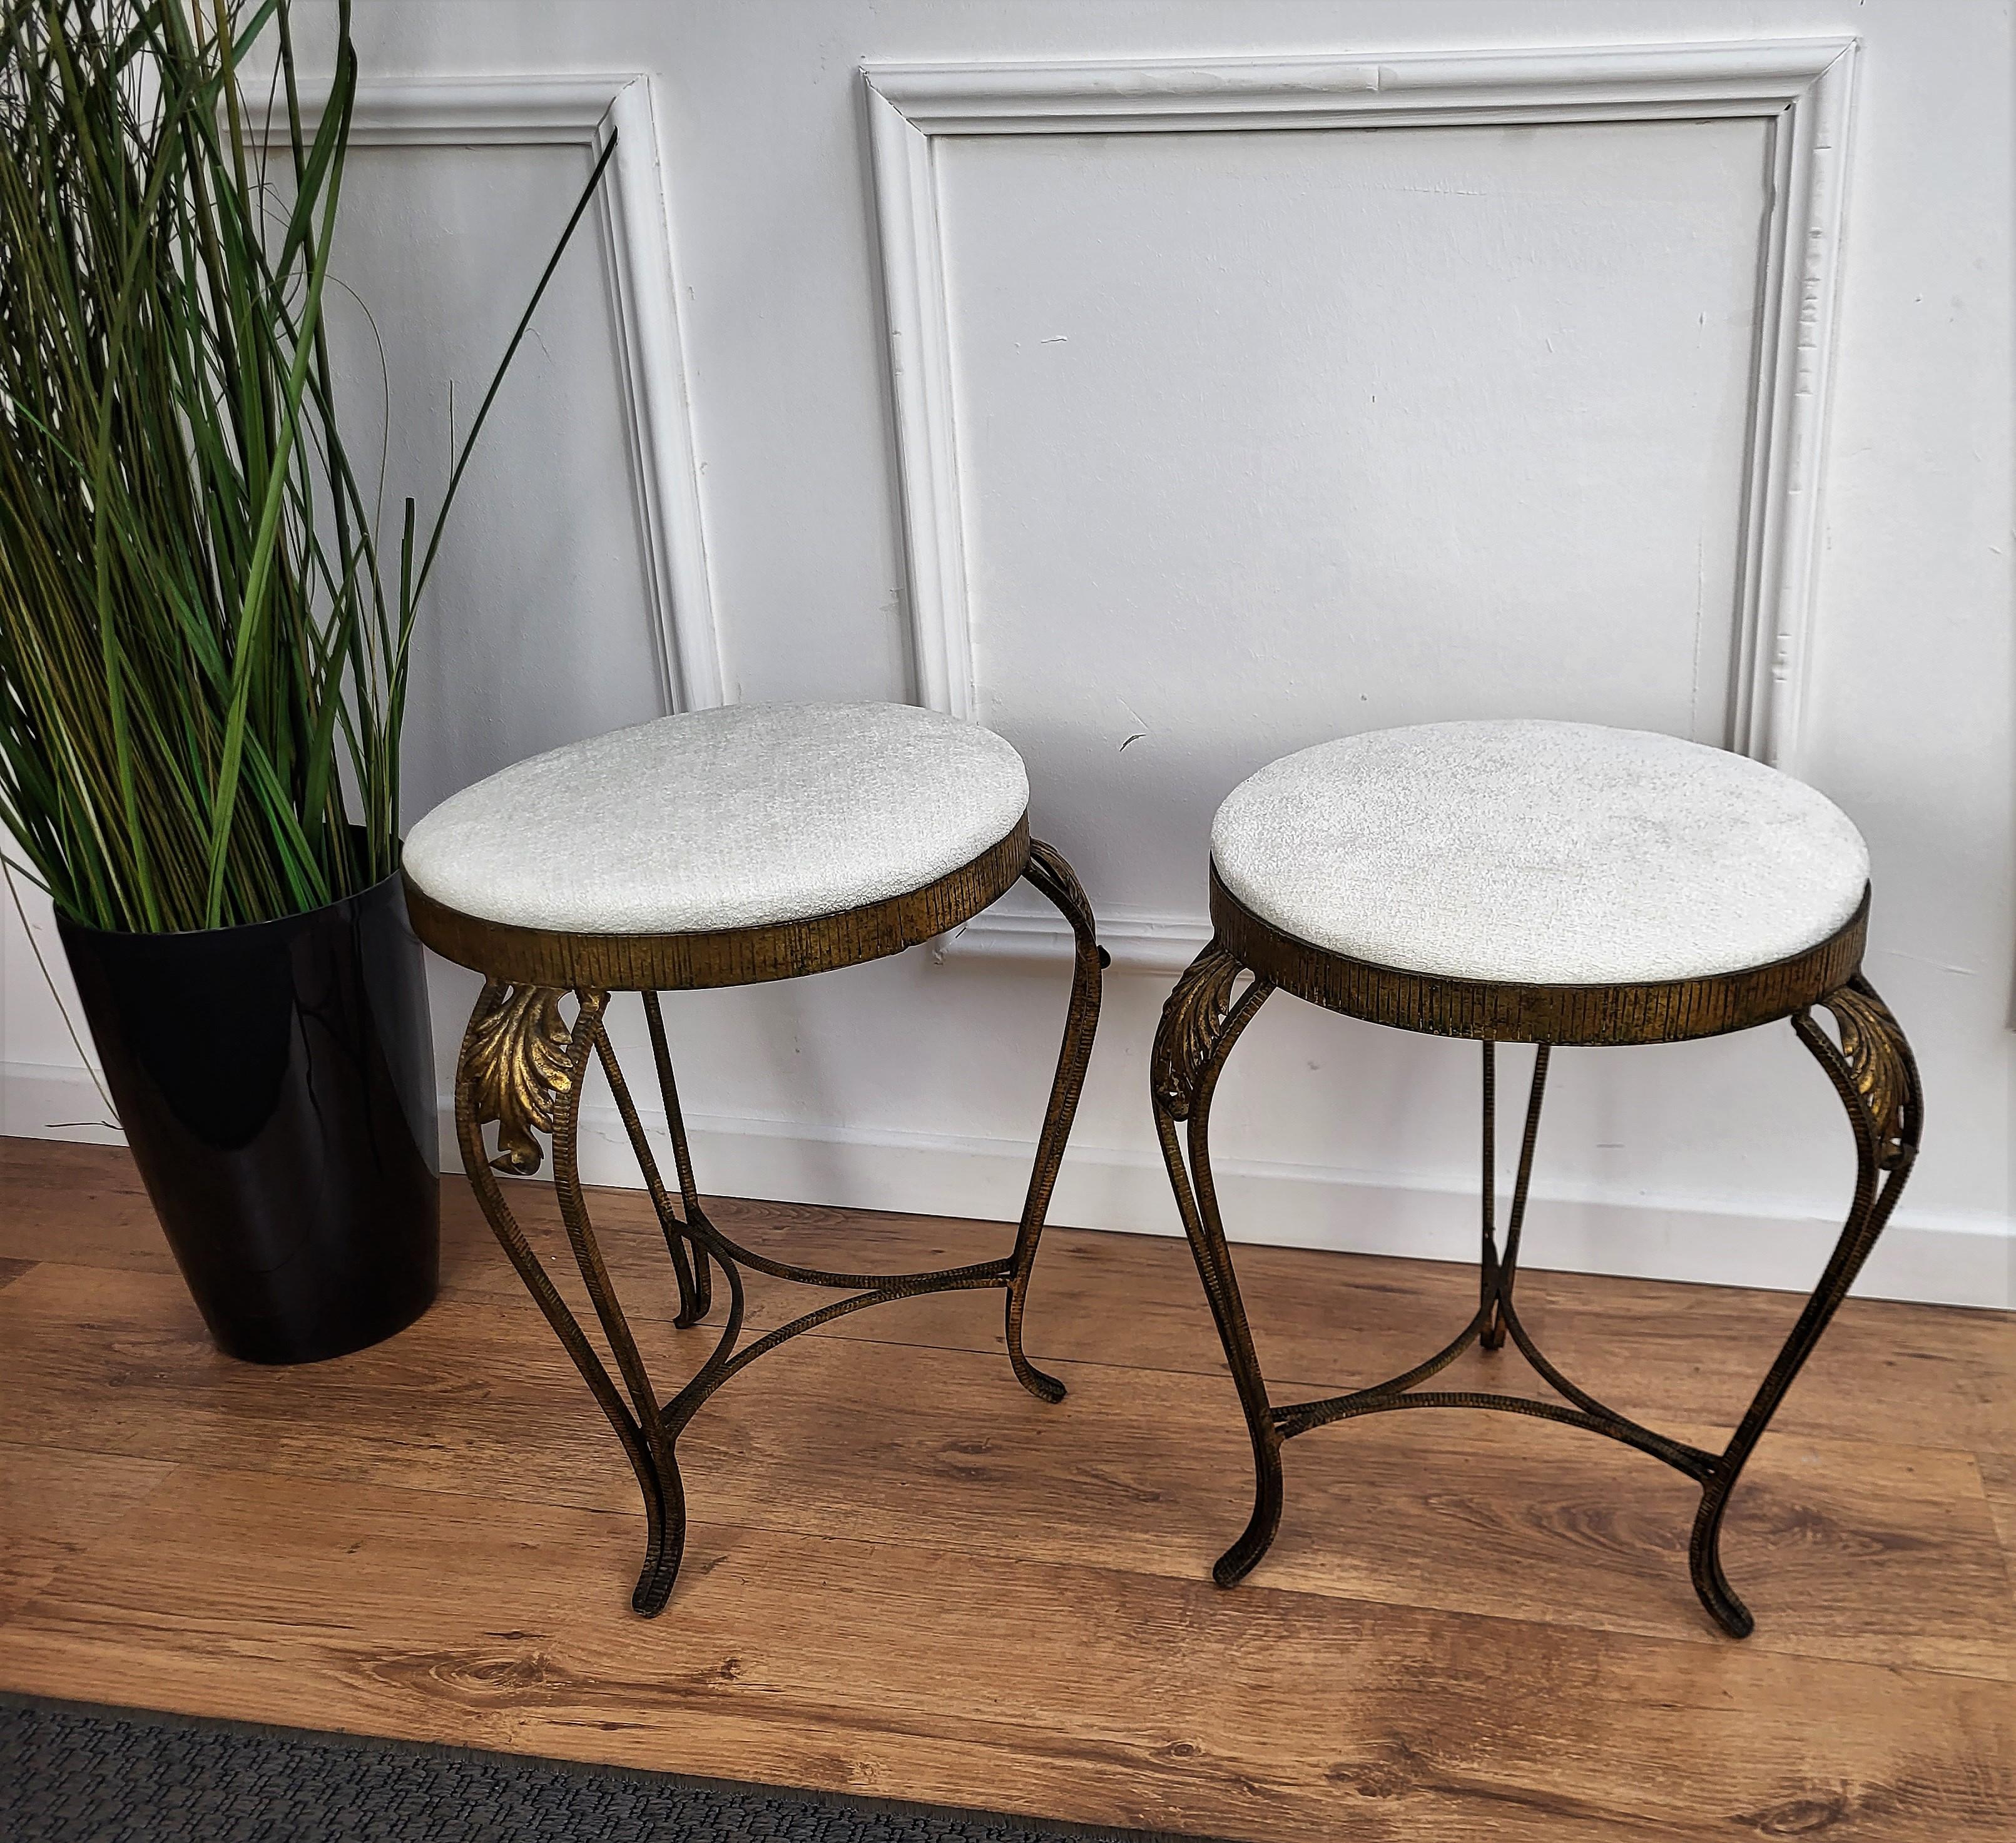 Very simple, stylish and elegant gilt brass tripod stools with white velvet new upholstery. They would make a fine fireside perch, tall footrest, or seats for a writing table.